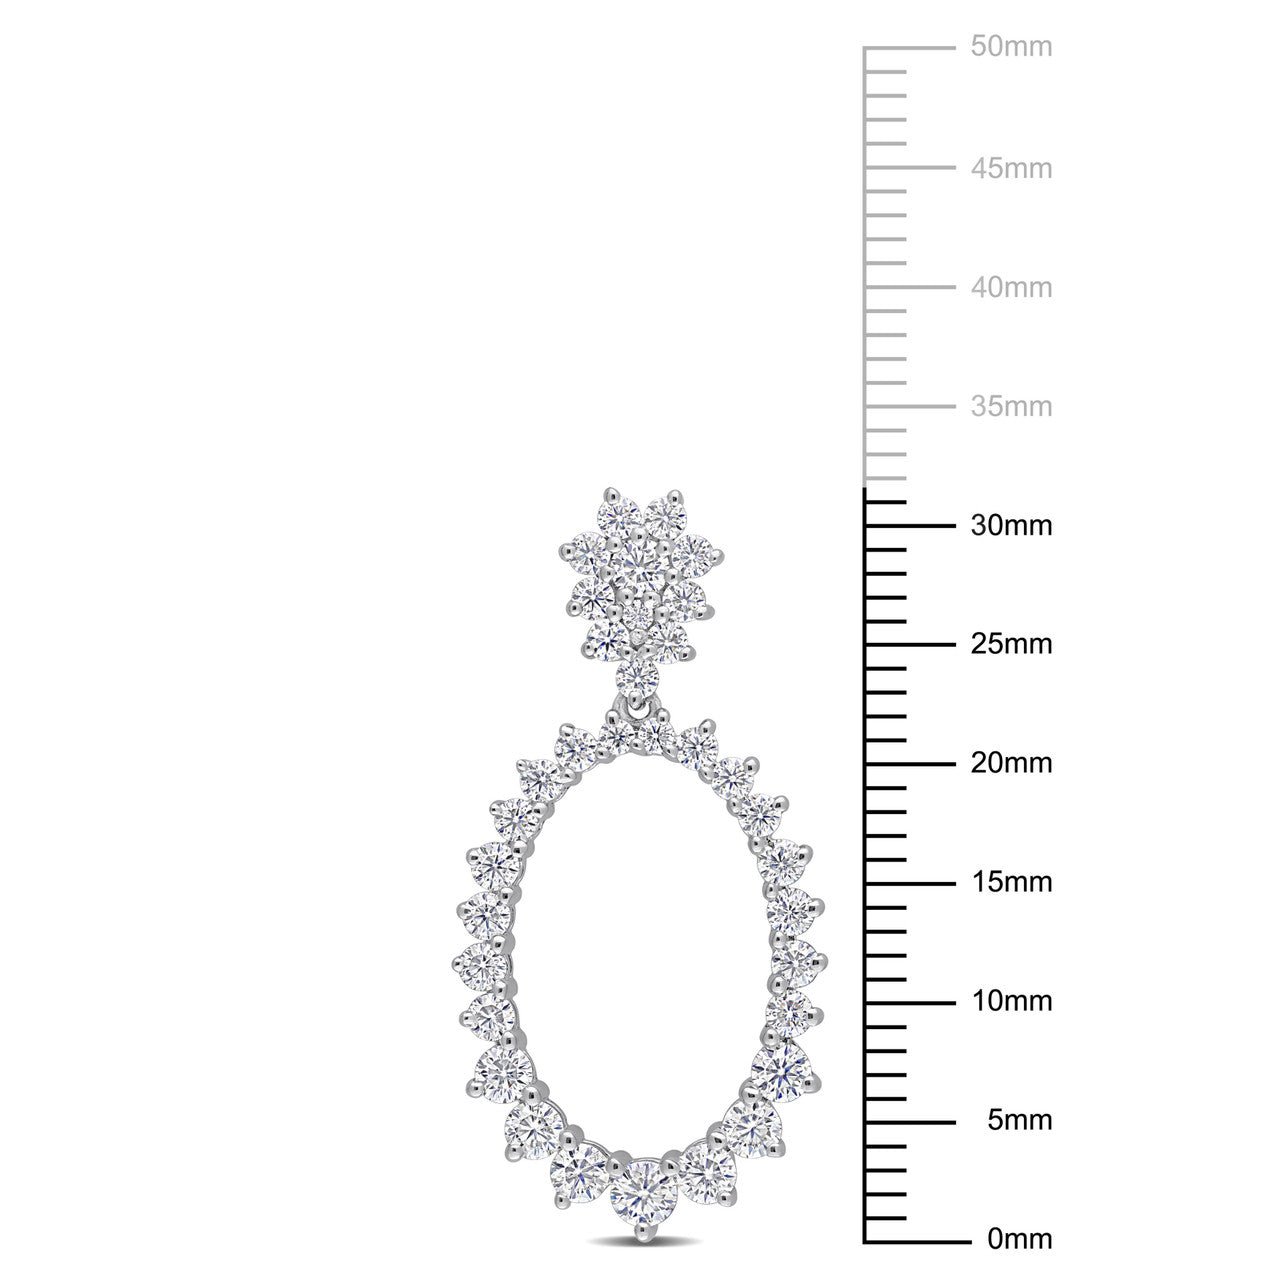 Ice Jewellery 2 1/3 CT Created Moissanite-White Drop Earrings in Sterling Silver - 75000005764 | Ice Jewellery Australia